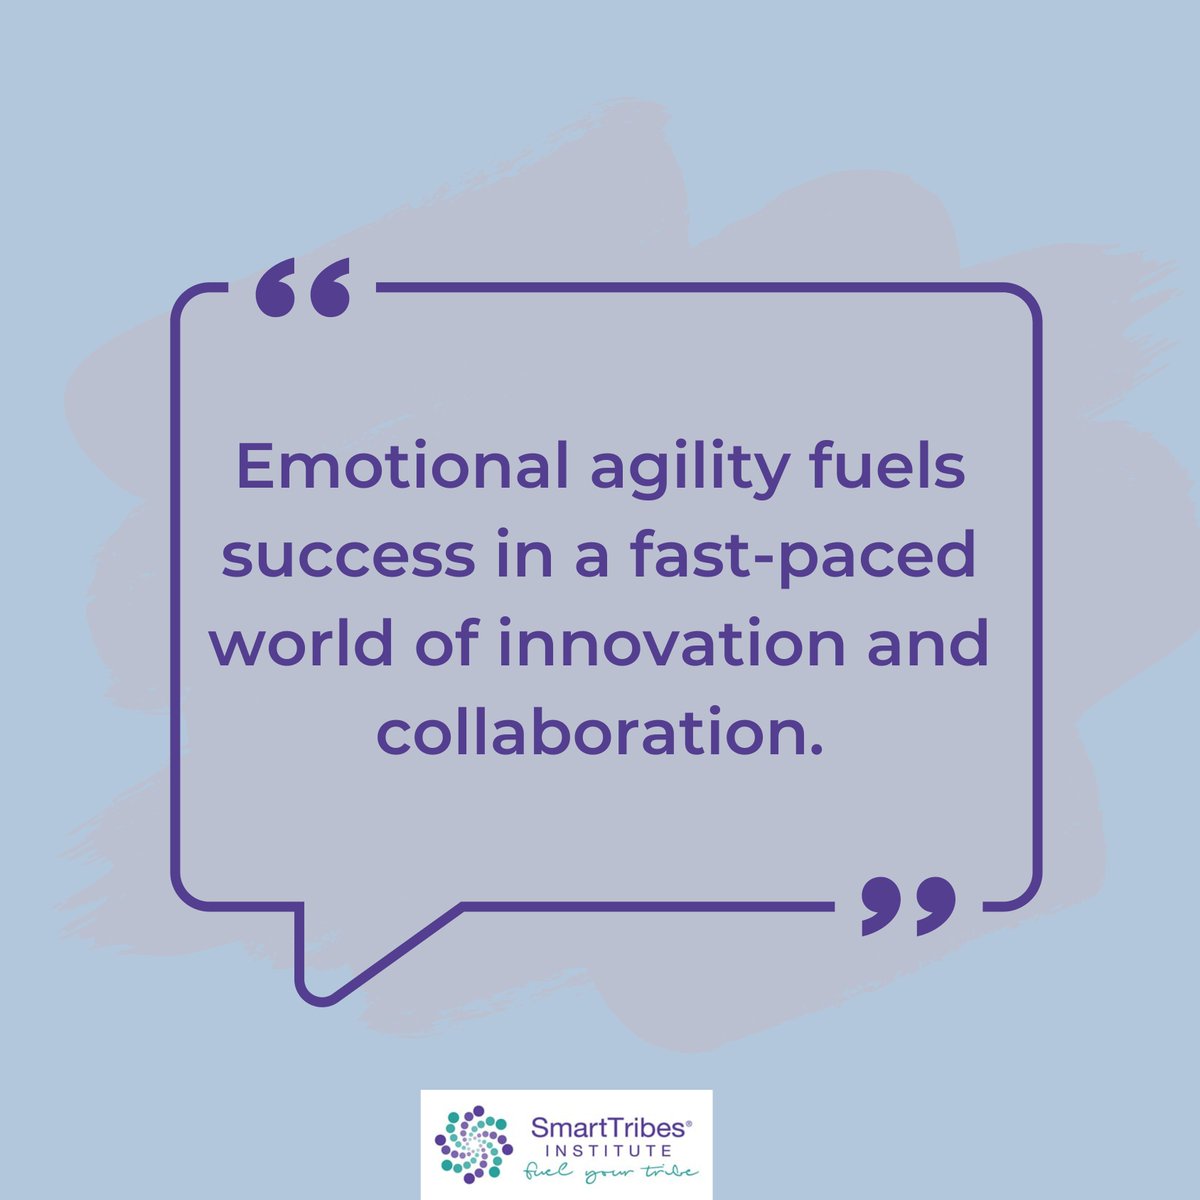 Harness the power of emotional agility for success in a rapidly changing world. Listen to our podcast for insights and strategies. Here is the link buff.ly/3PTVzGO #EmotionalAgility #Innovation #Collaboration #ChooseYourself #Podcast #STI